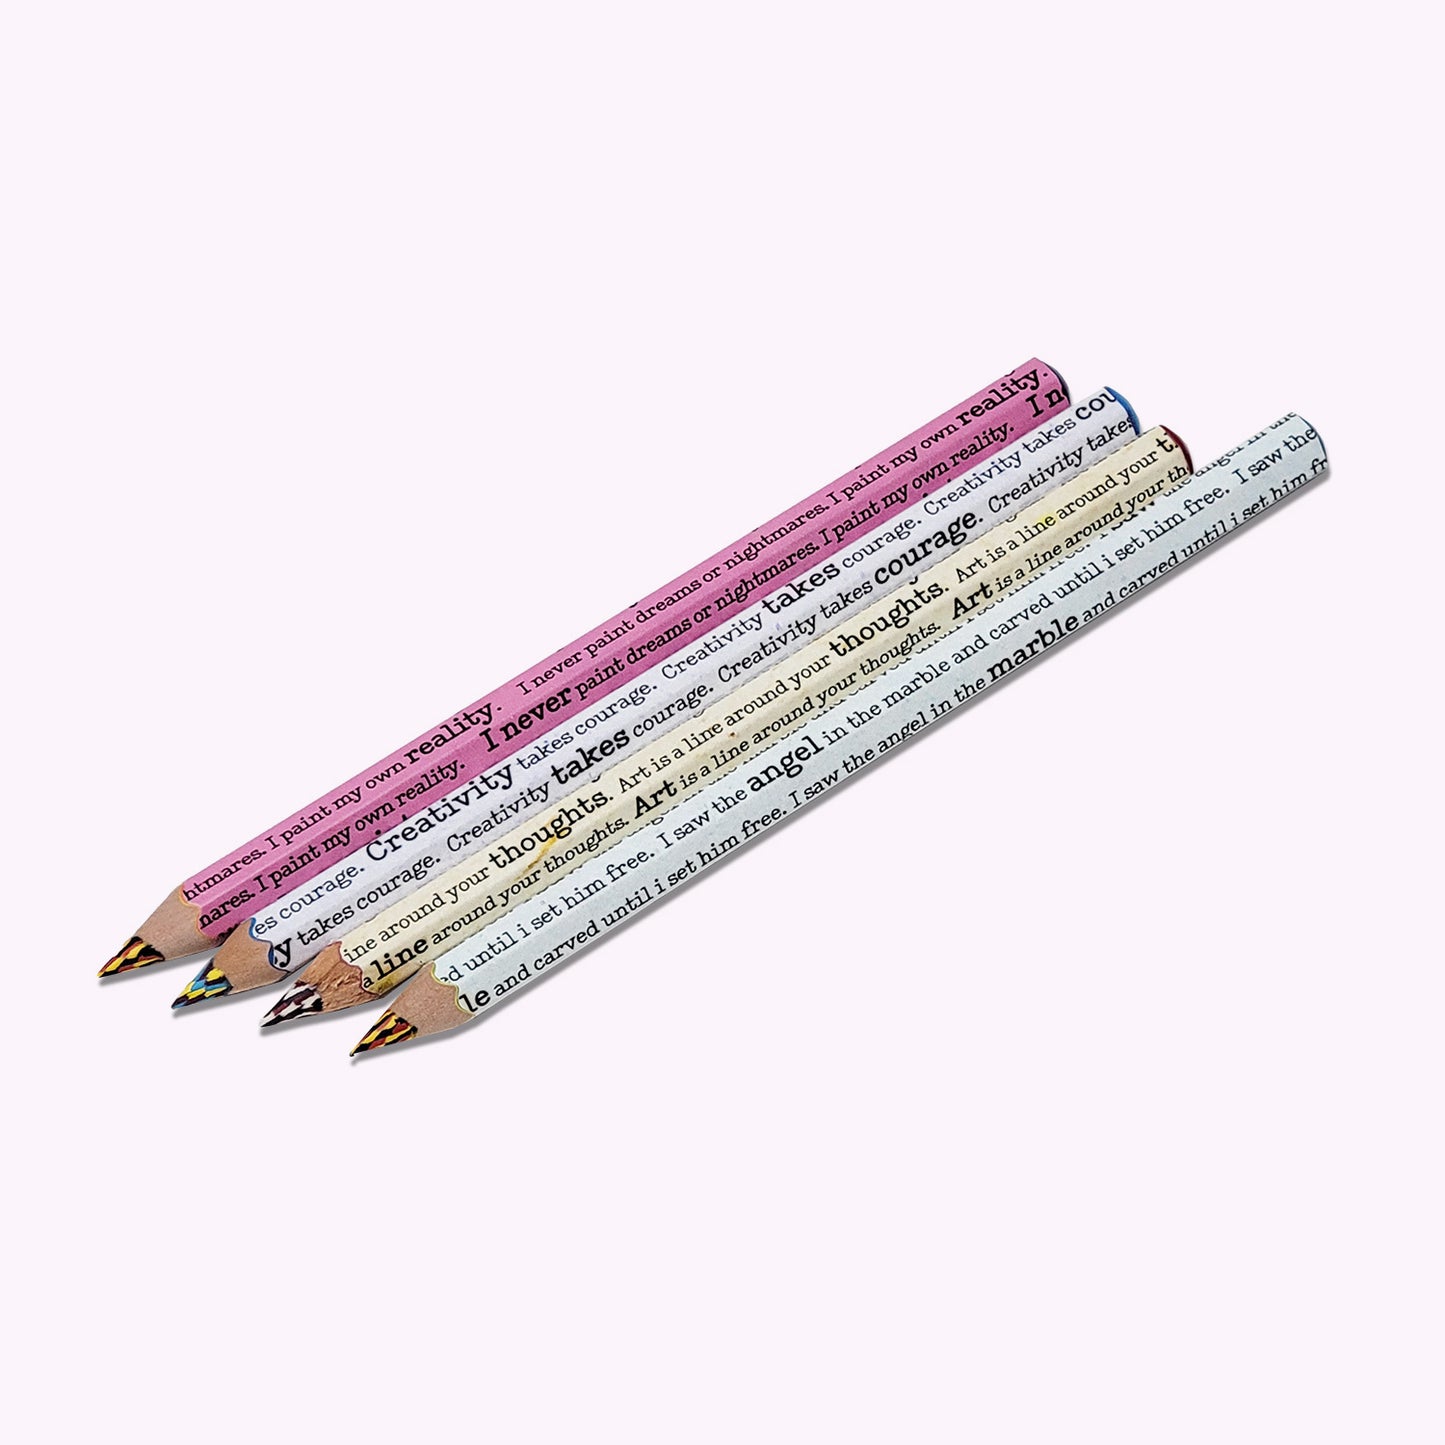 4 Multicolor Pencil wrapped with an Illustration